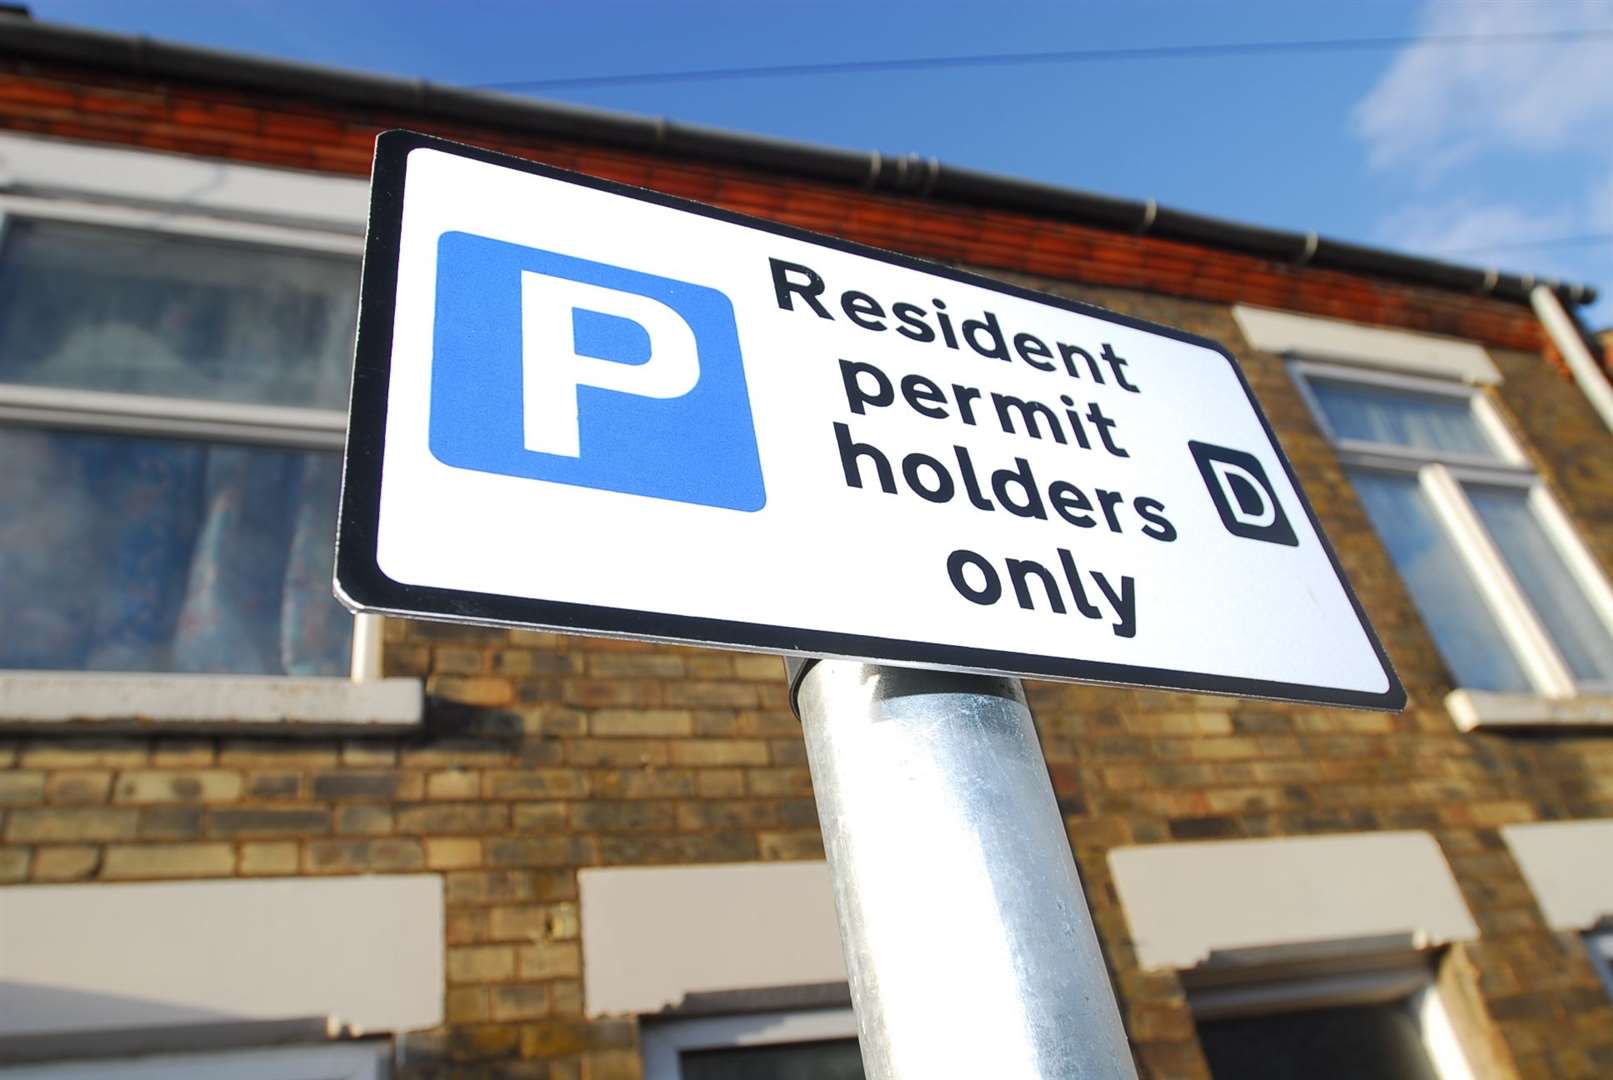 Parking permits will be suspended amid the coronavirus outbreak